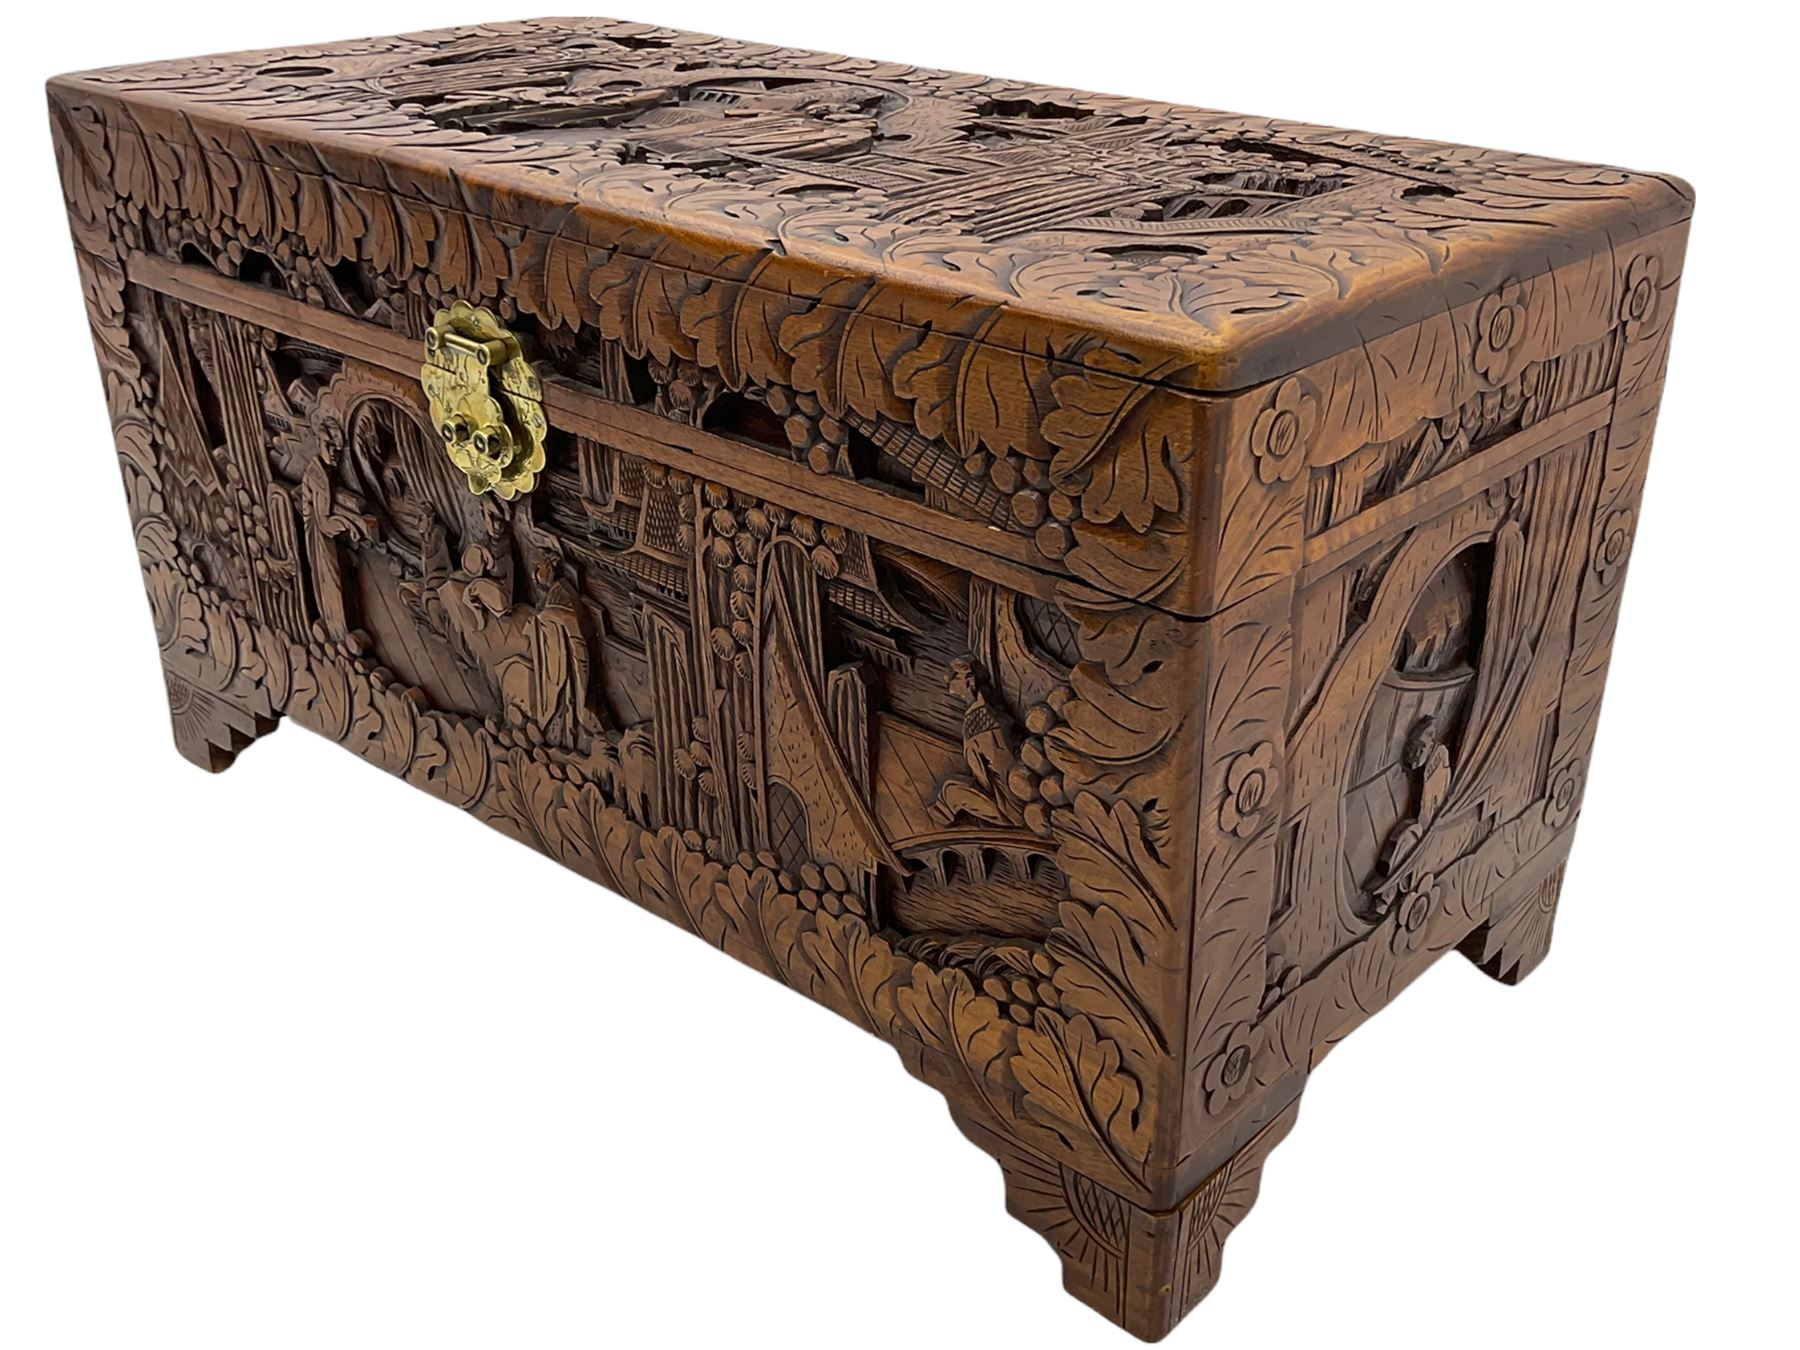 Chinese carved camphor wood blanket chest - Image 4 of 6